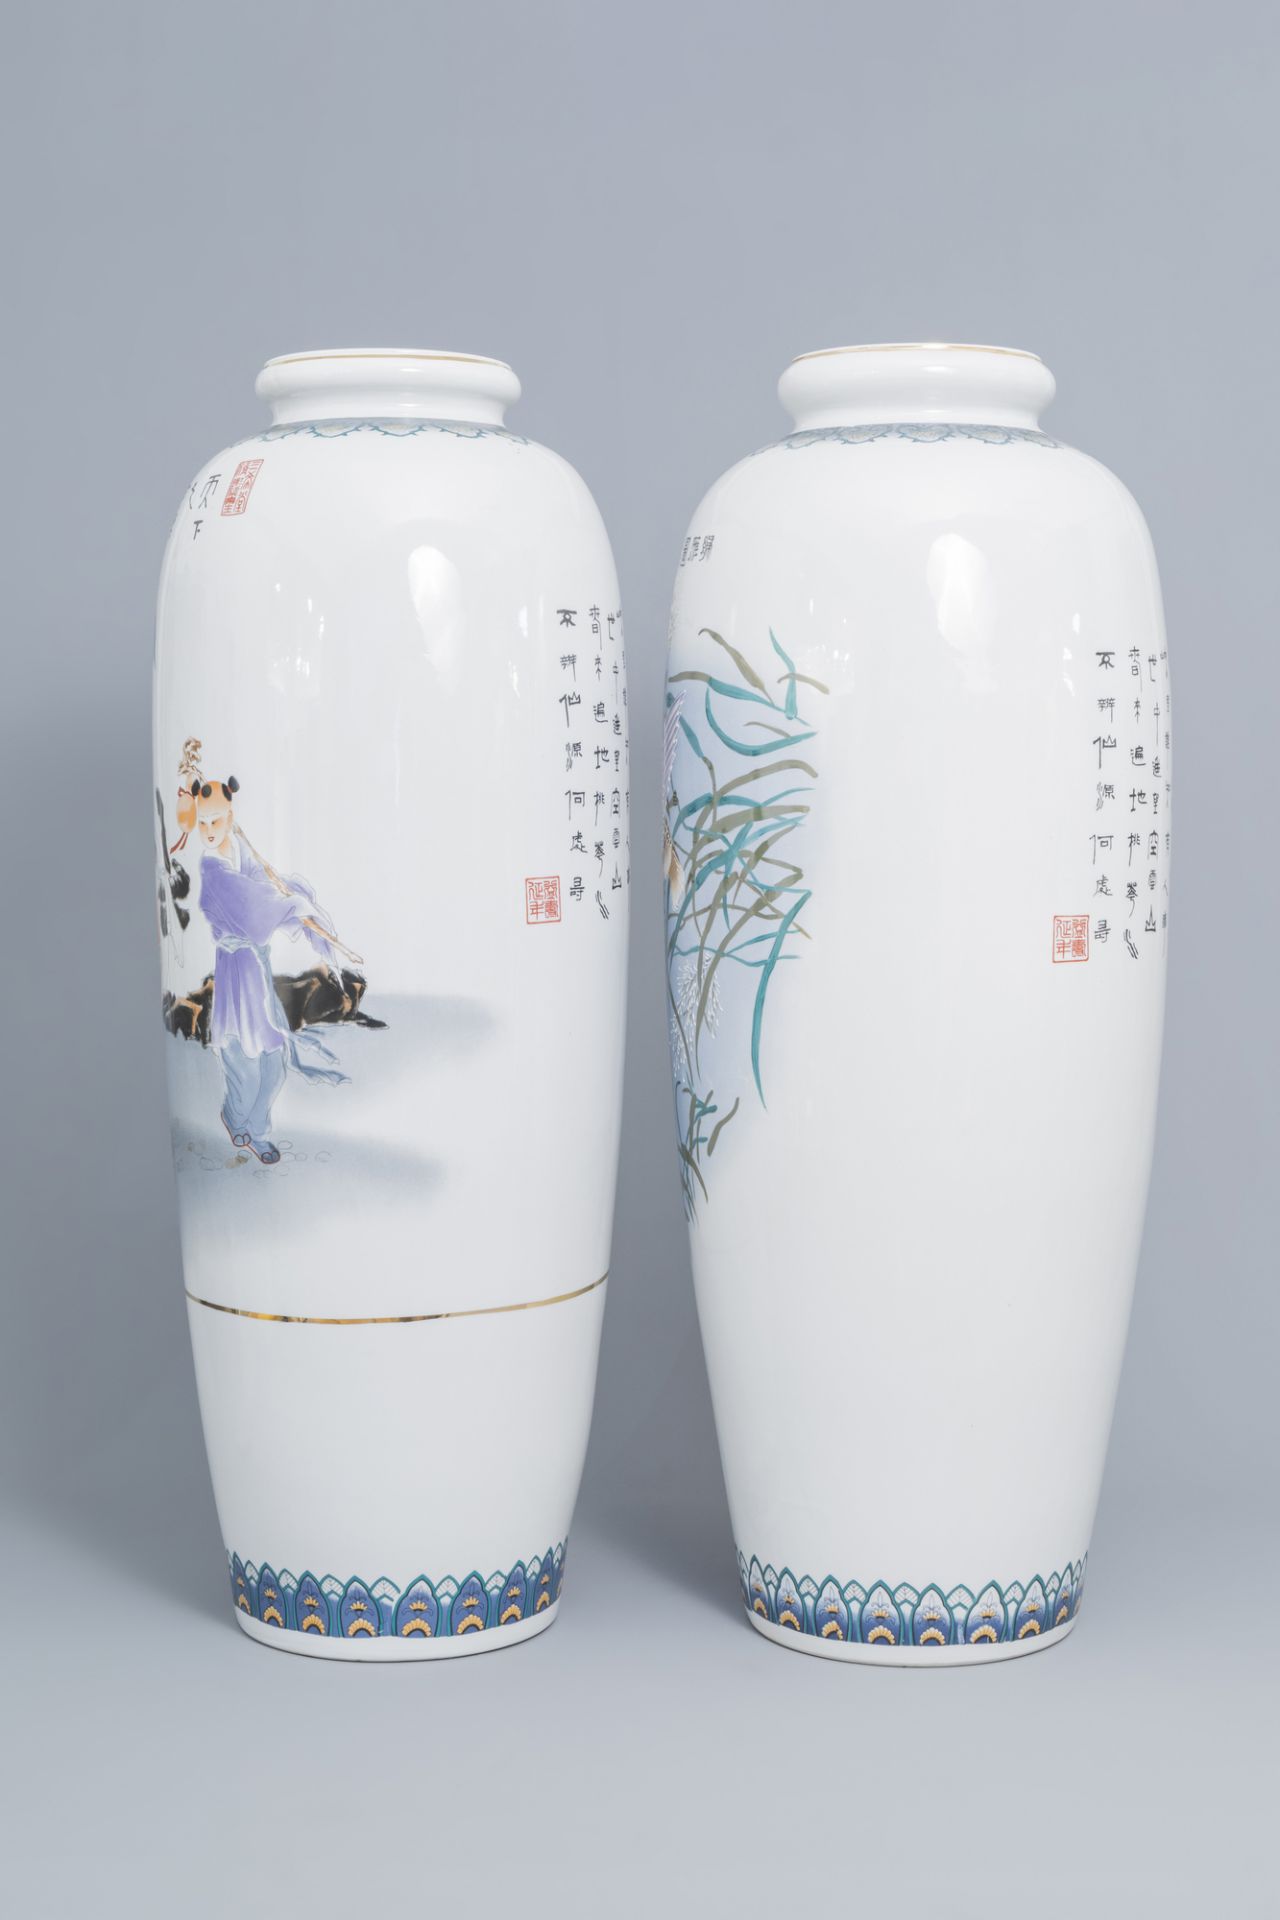 Two large Chinese polychrome vases with ducks and figures in a landscape, 20th C. - Image 5 of 7